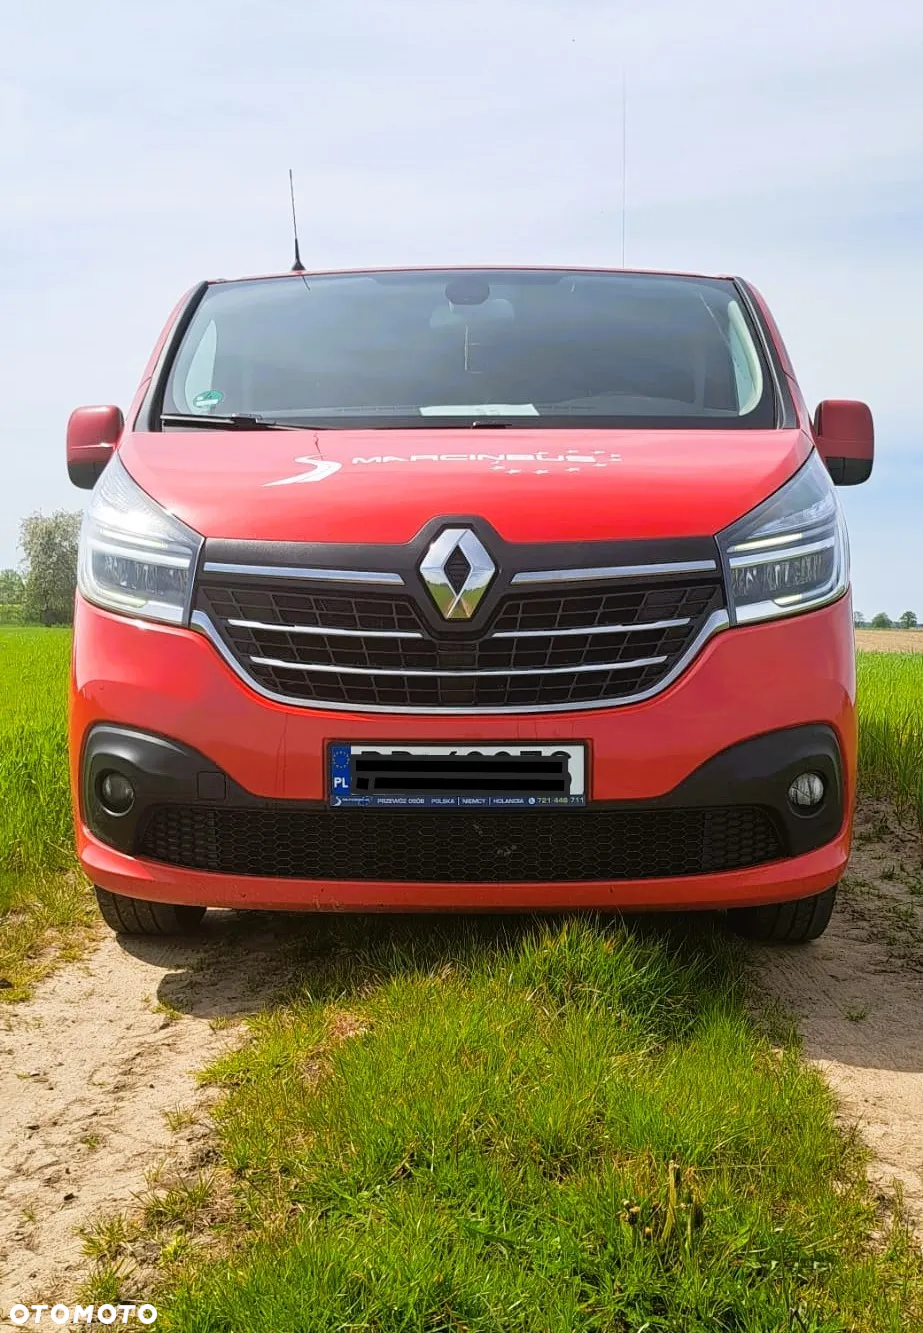 Renault Trafic Grand SpaceClass 2.0 dCi - 2